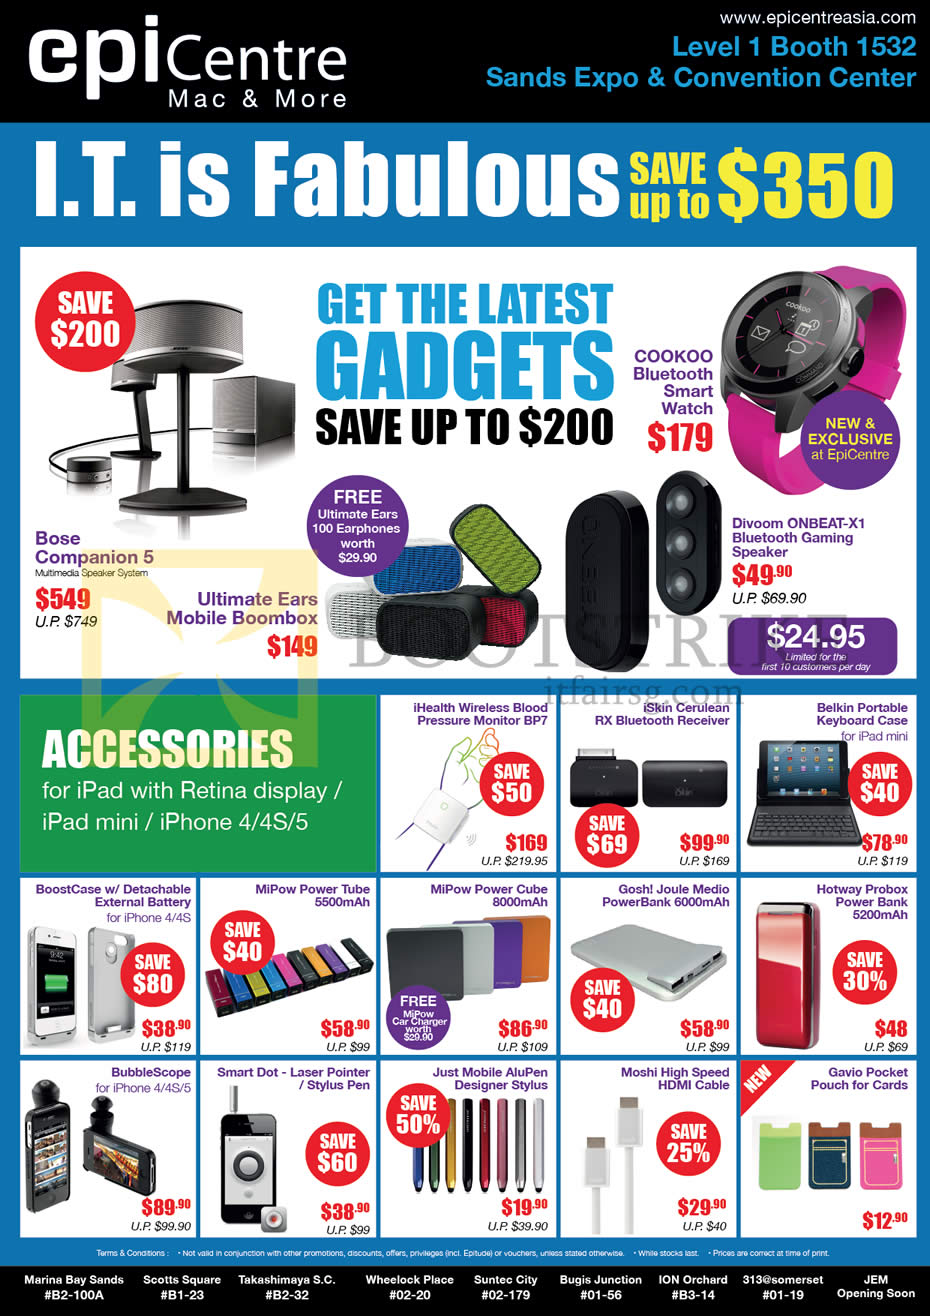 IT SHOW 2013 price list image brochure of EpiCentre Bose Companion 5, Ultimate Ears Mobile Boombox, Divoom Onbeat-X1 Speaker, IHealth, MiPow Portable Charger, Gosh, Moshi, BubbleScope